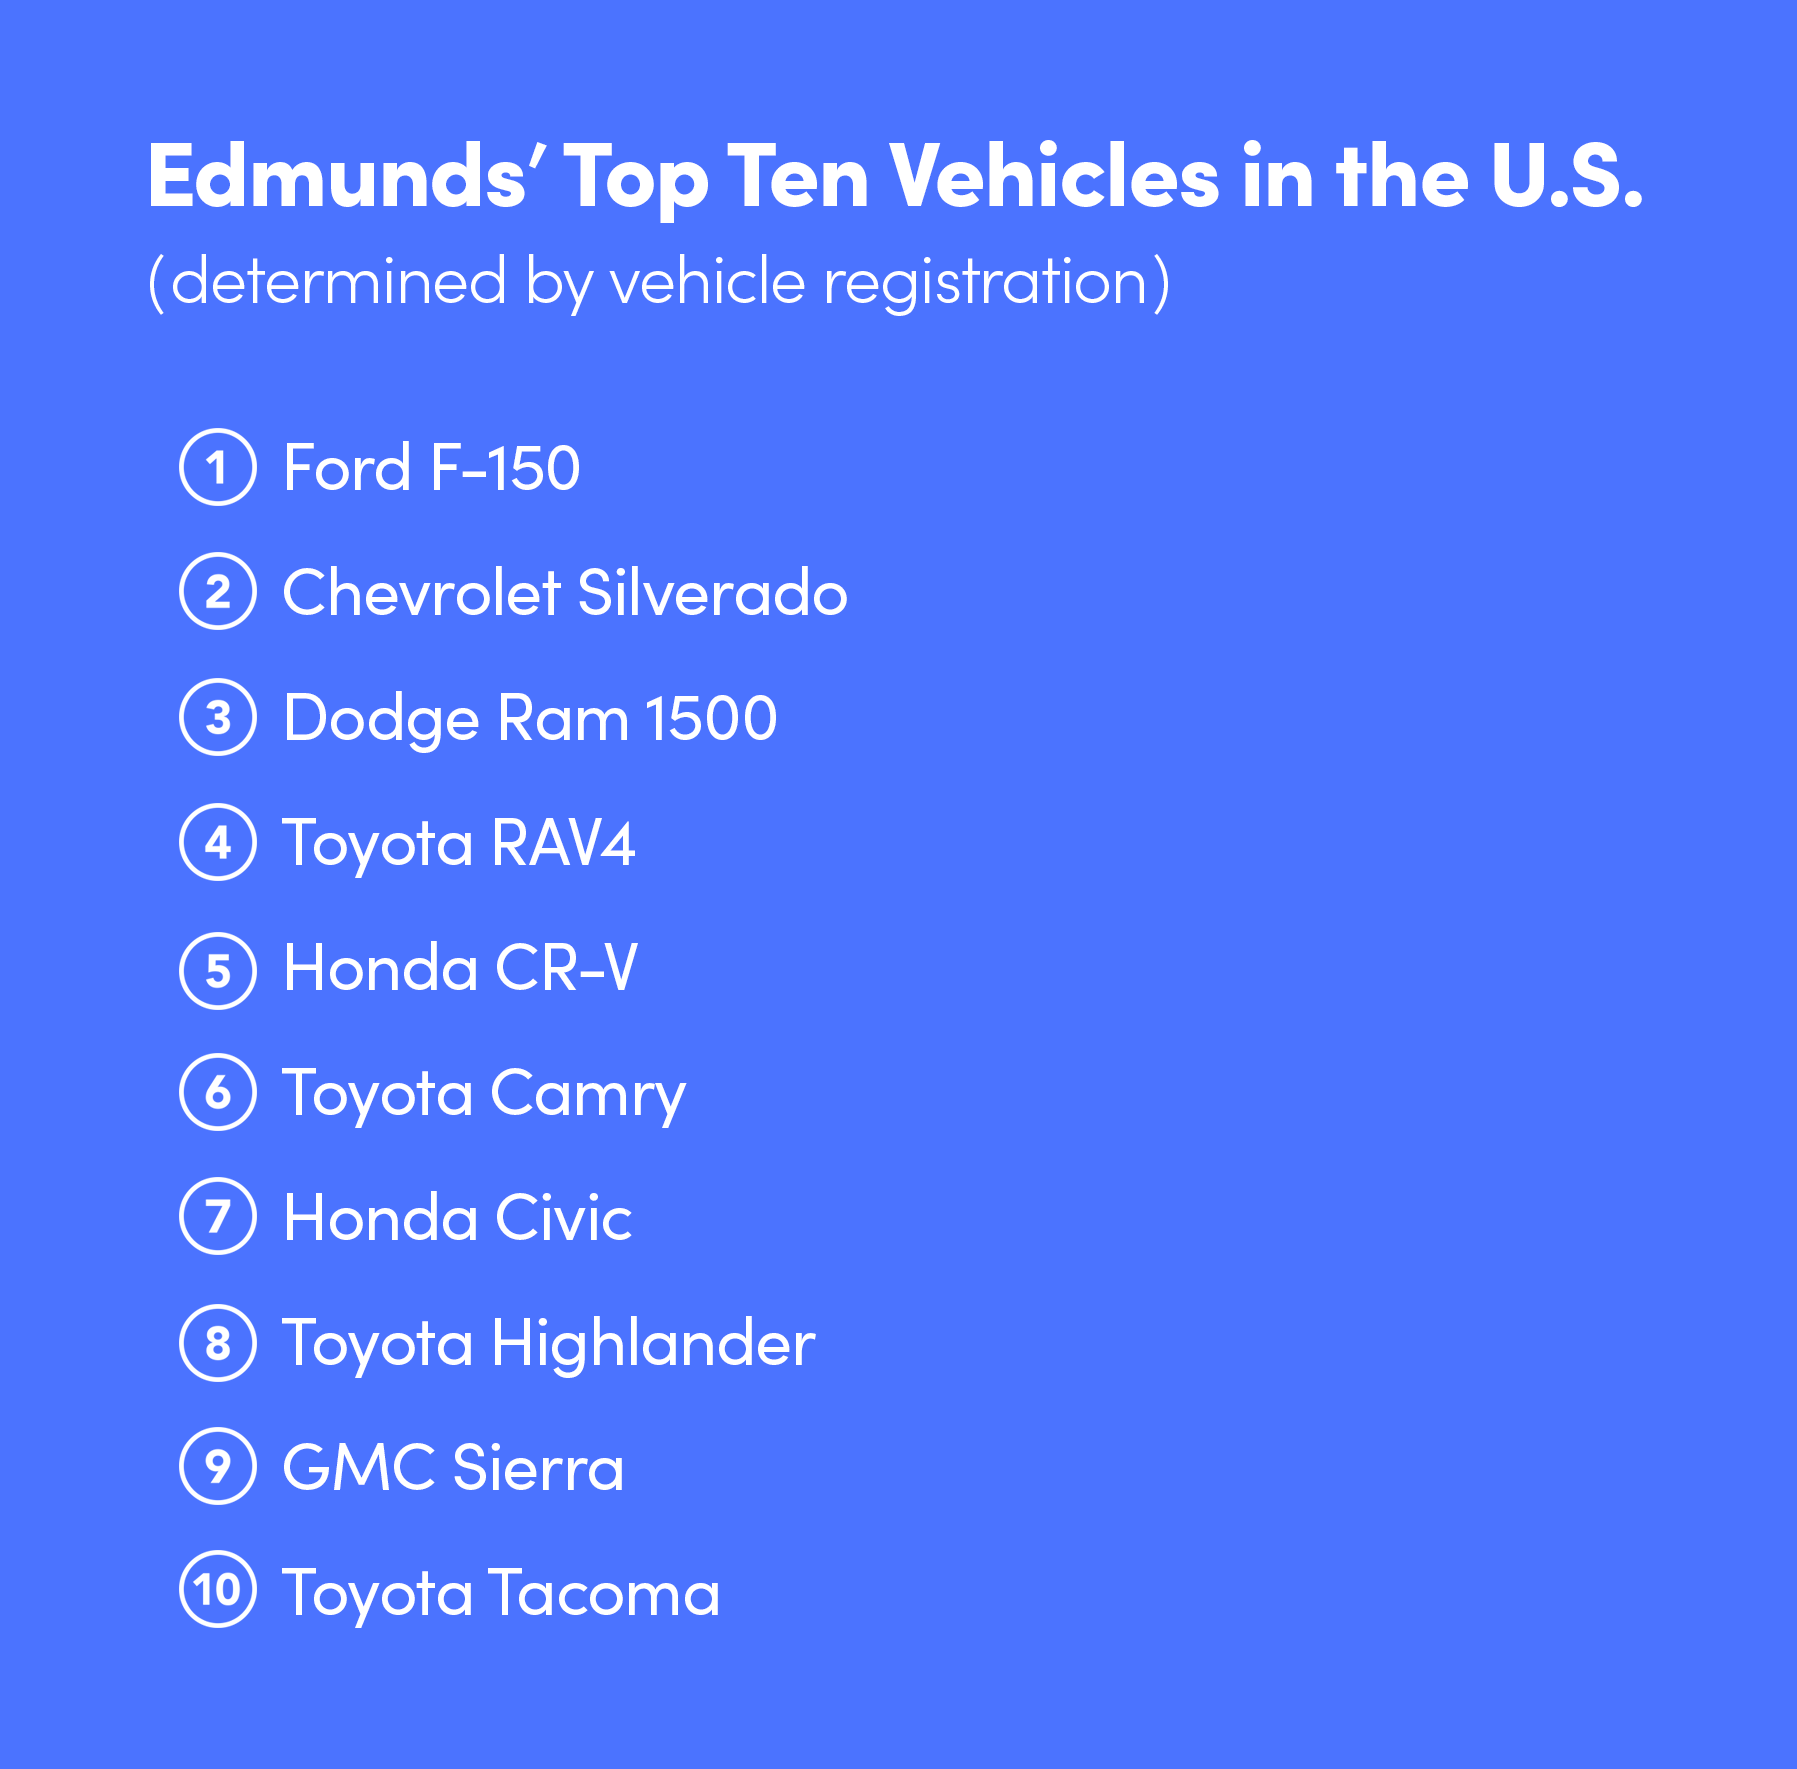 Graphic listing the most popular cars in America according to data from 2021 published on Edmunds.com.